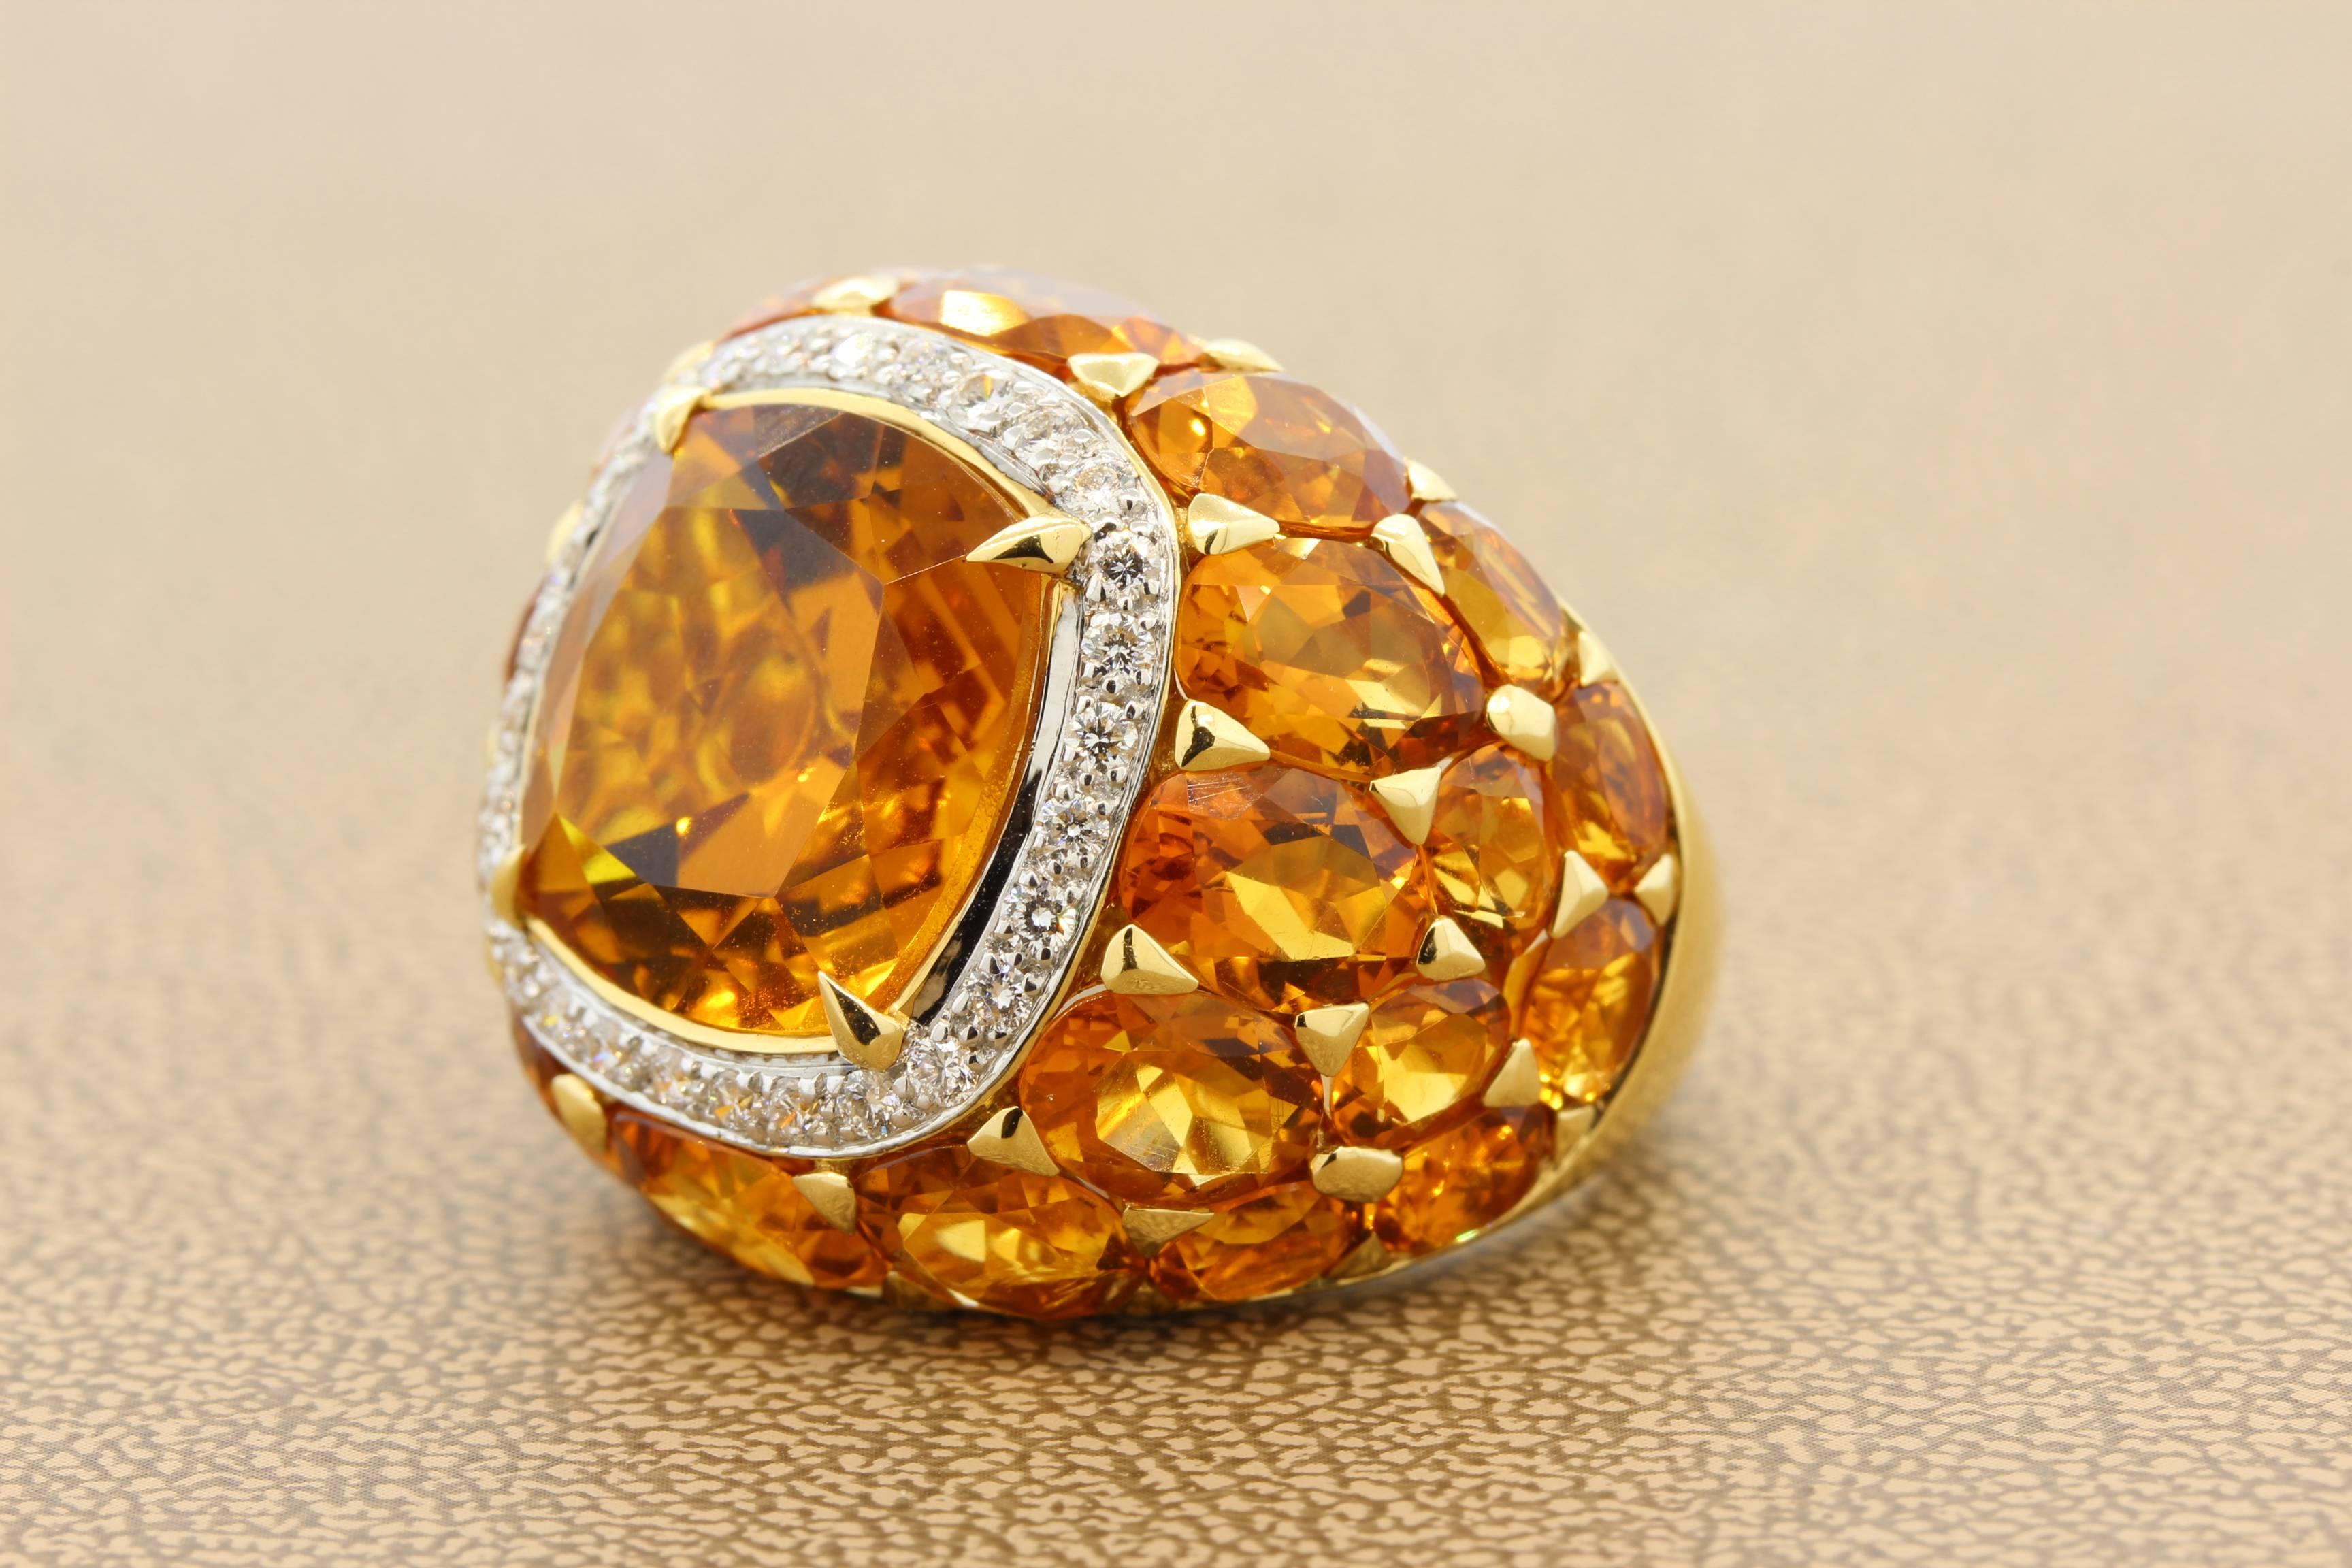 A bold look, this cocktail ring features a 11.28 carat cushion cut citrine which is haloed by 0.52 carats of diamonds. Around the ring are 17.30 carats of oval shape citrine giving it it’s unique look. 

Set in 18K yellow gold, a special ring for a